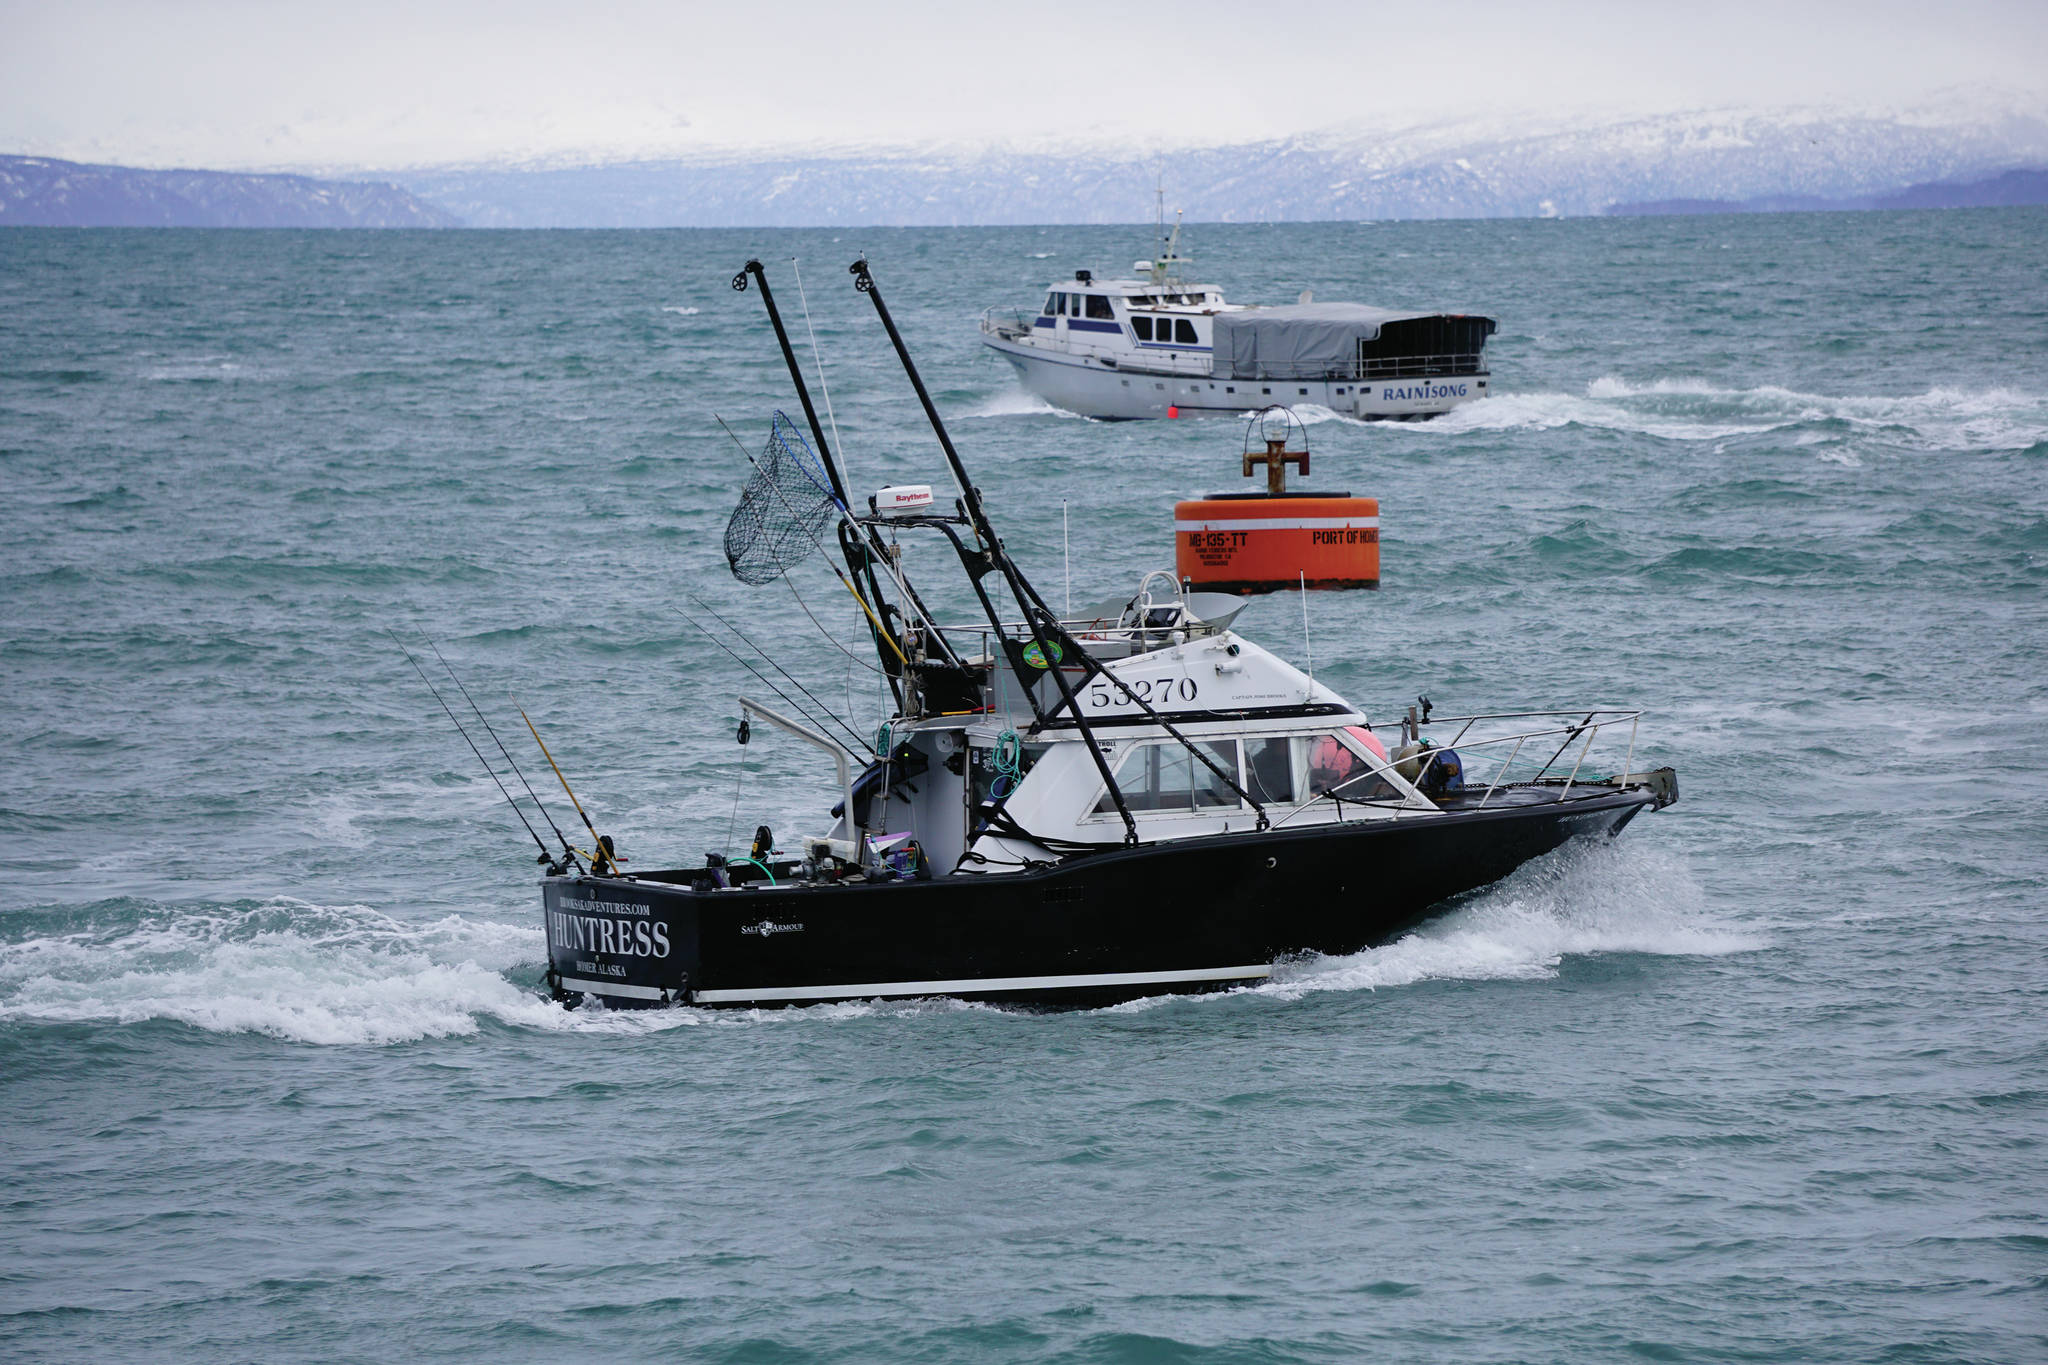 The Huntress, bottom, and the Rainisong, top, leave the Homer Harbor on Thursday, Jan. 28, 2021, in Homer, Alaska. (Photo by Michael Armstrong/Homer News)